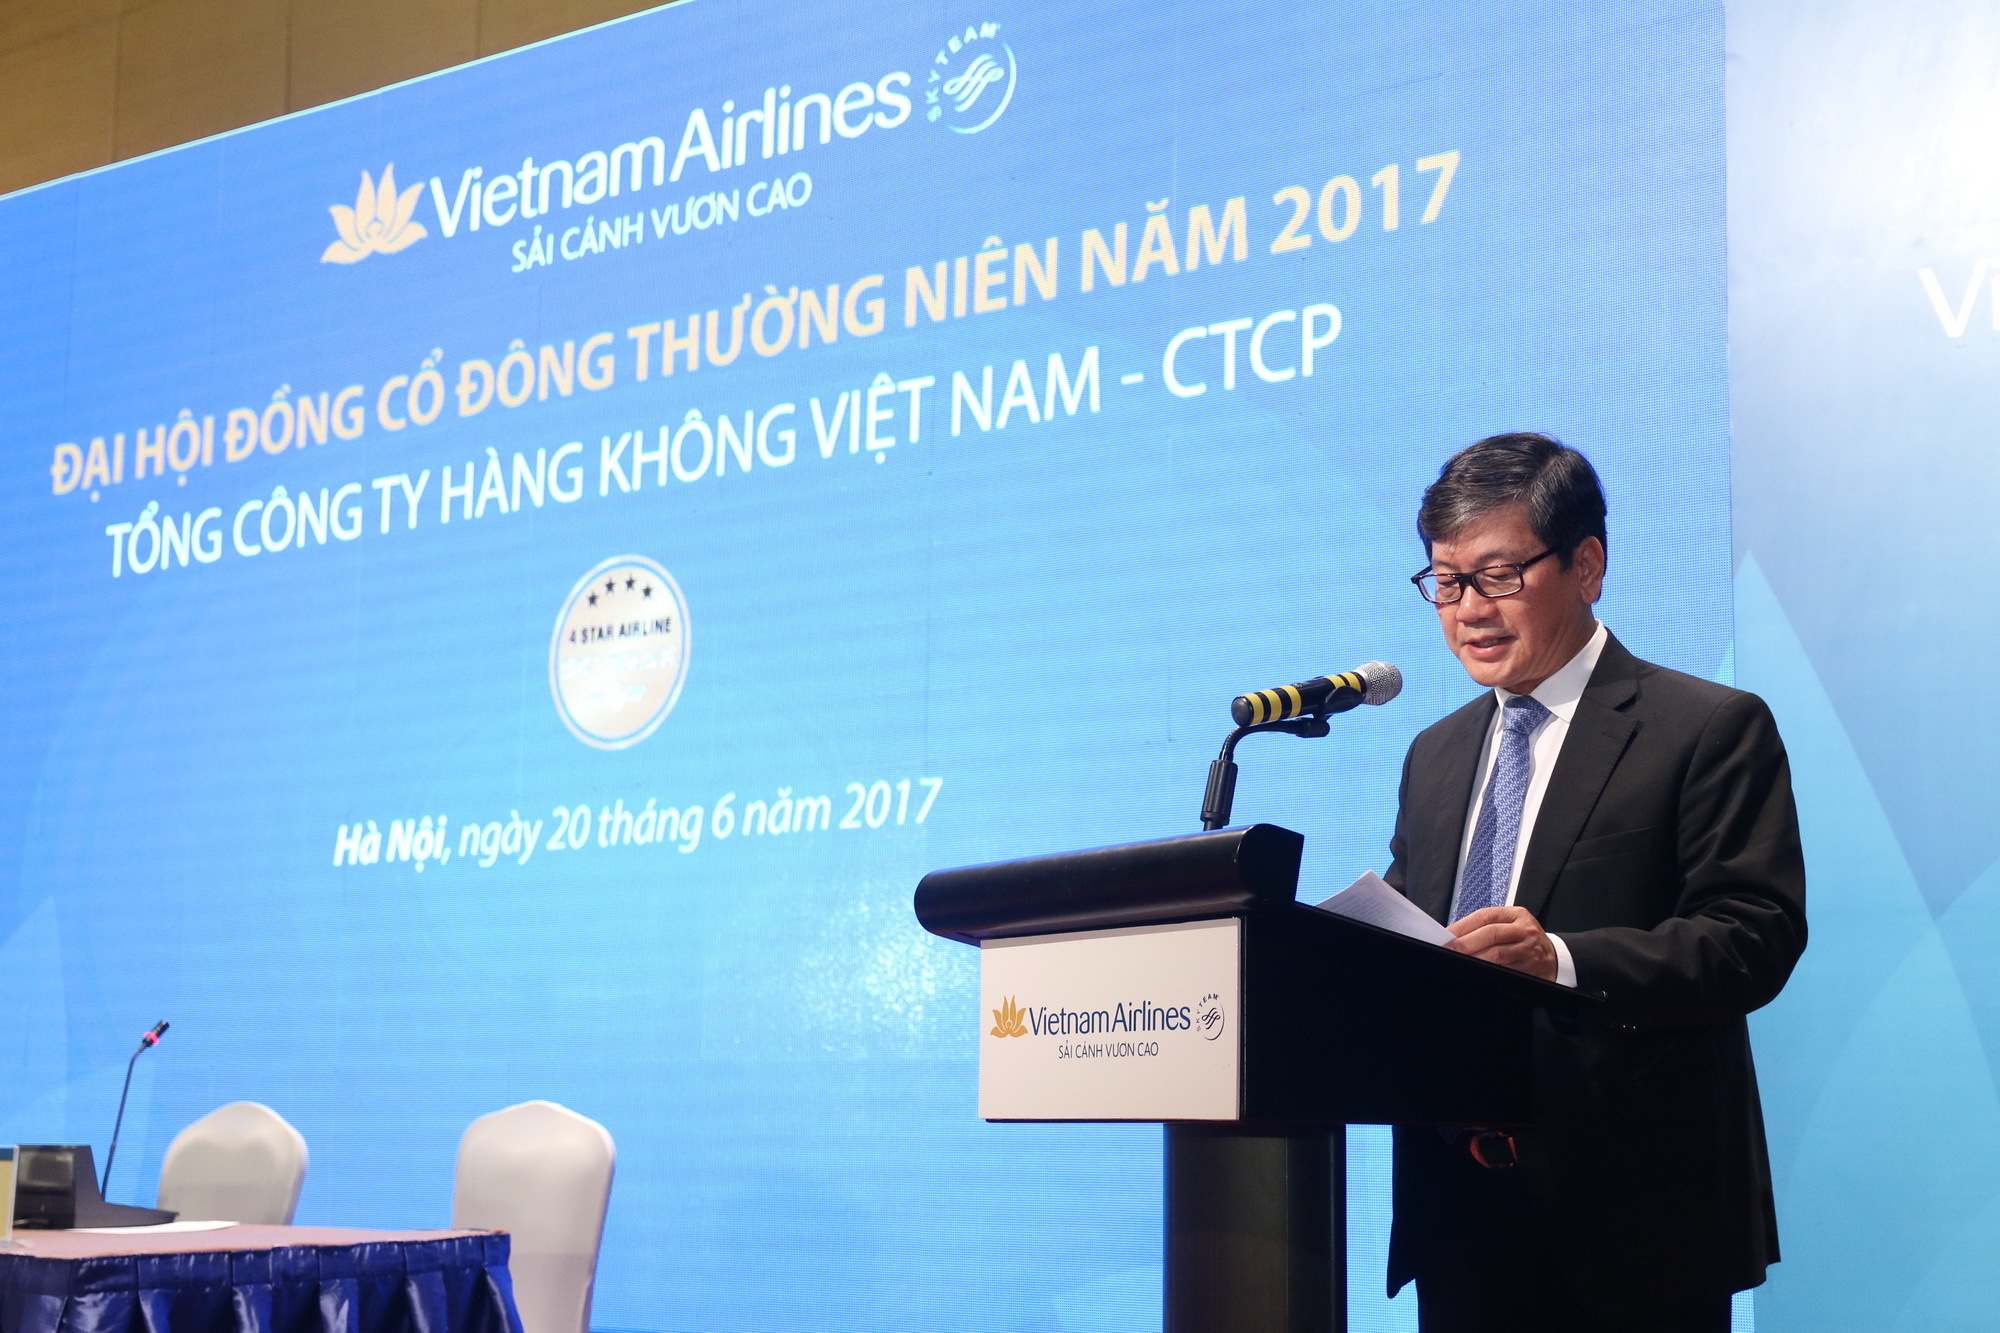 co-dong-vietnam-airlines-duoc-nhan-73652-ty-dong-tien-co-tuc-trong-nam-2016-giadinhonline.vn 1